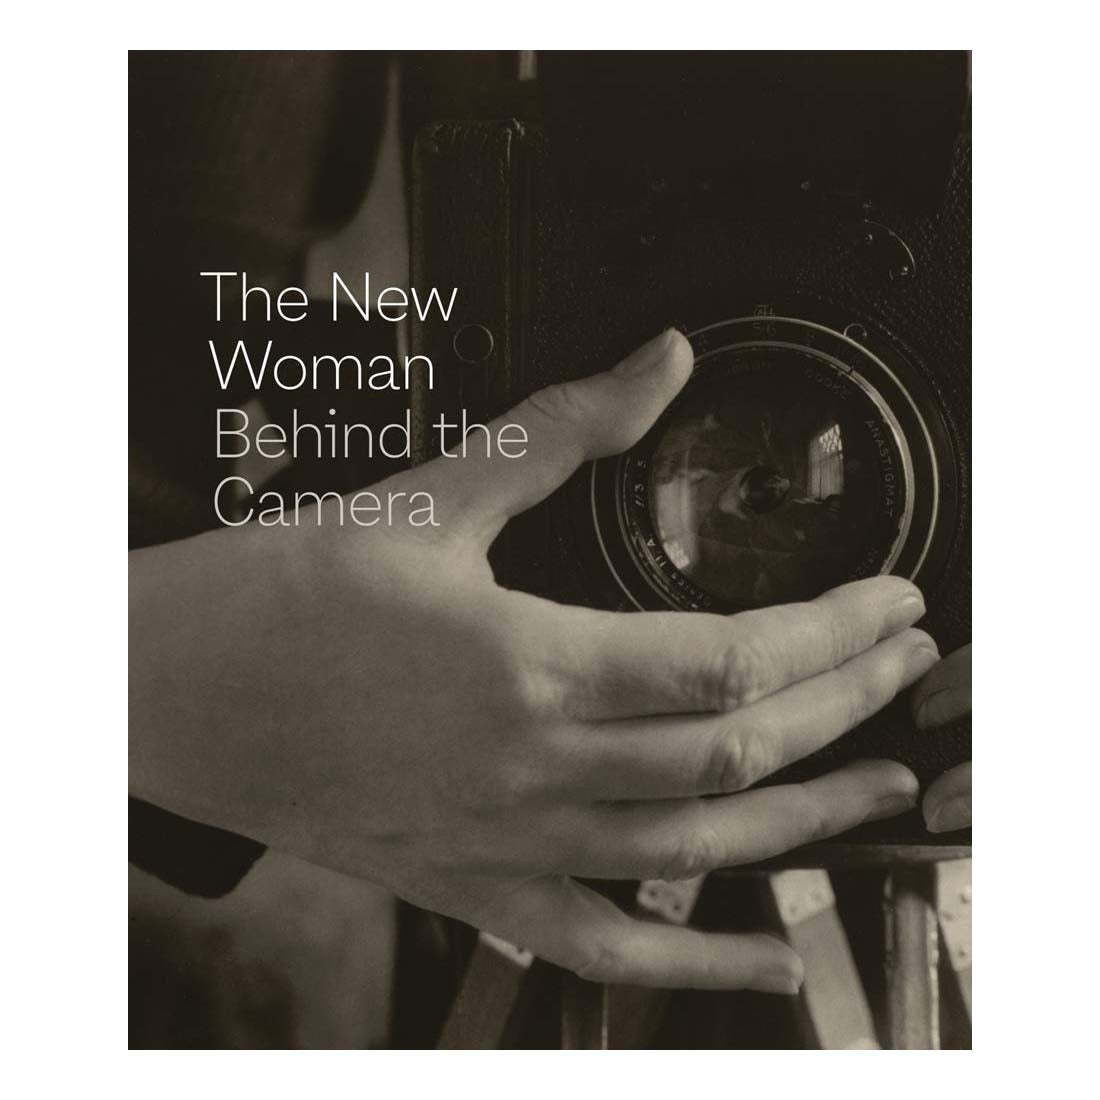 The New Woman Behind the Camera